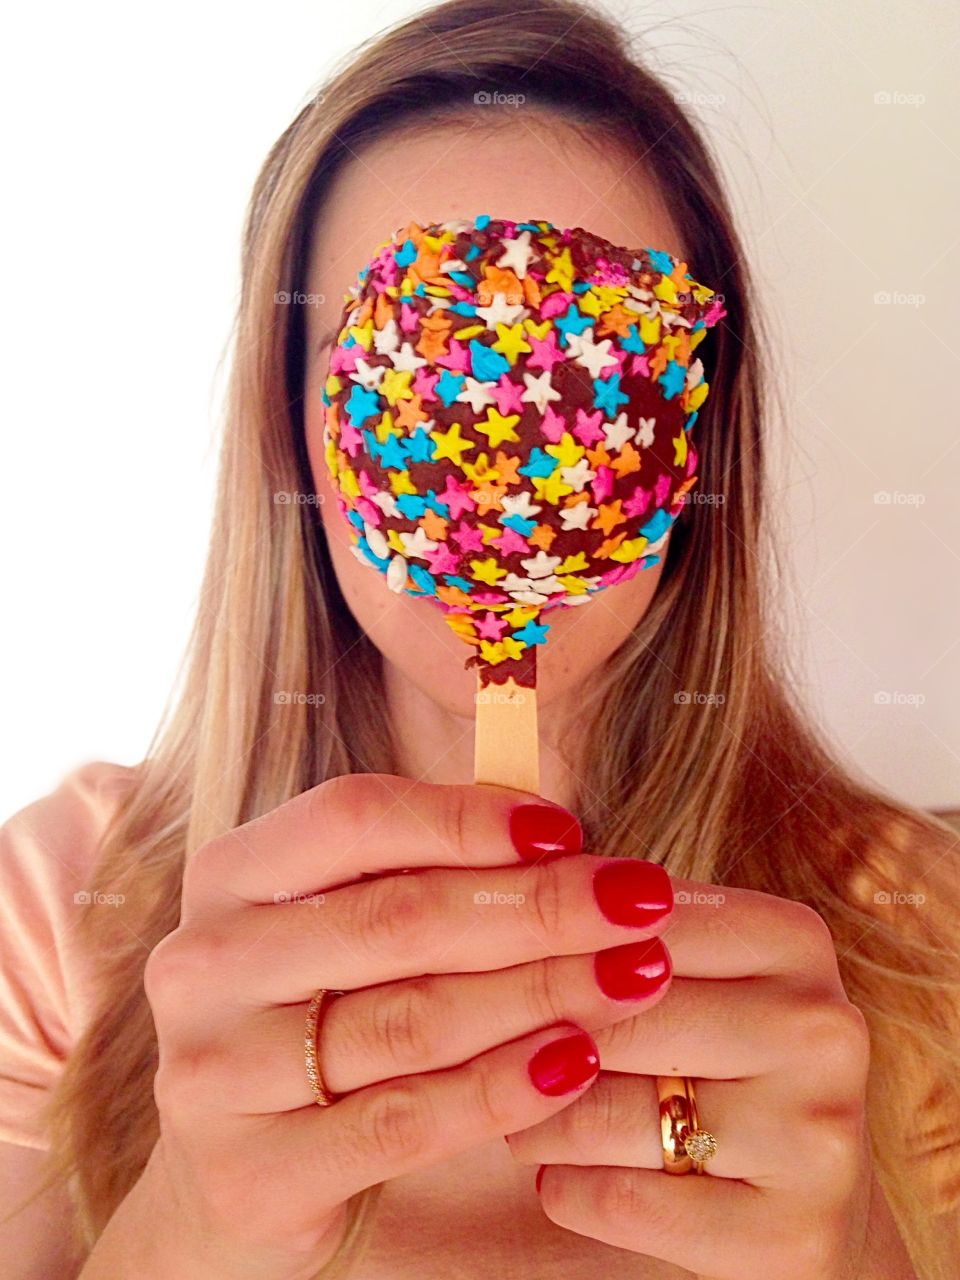 Woman holding candy in front of her face